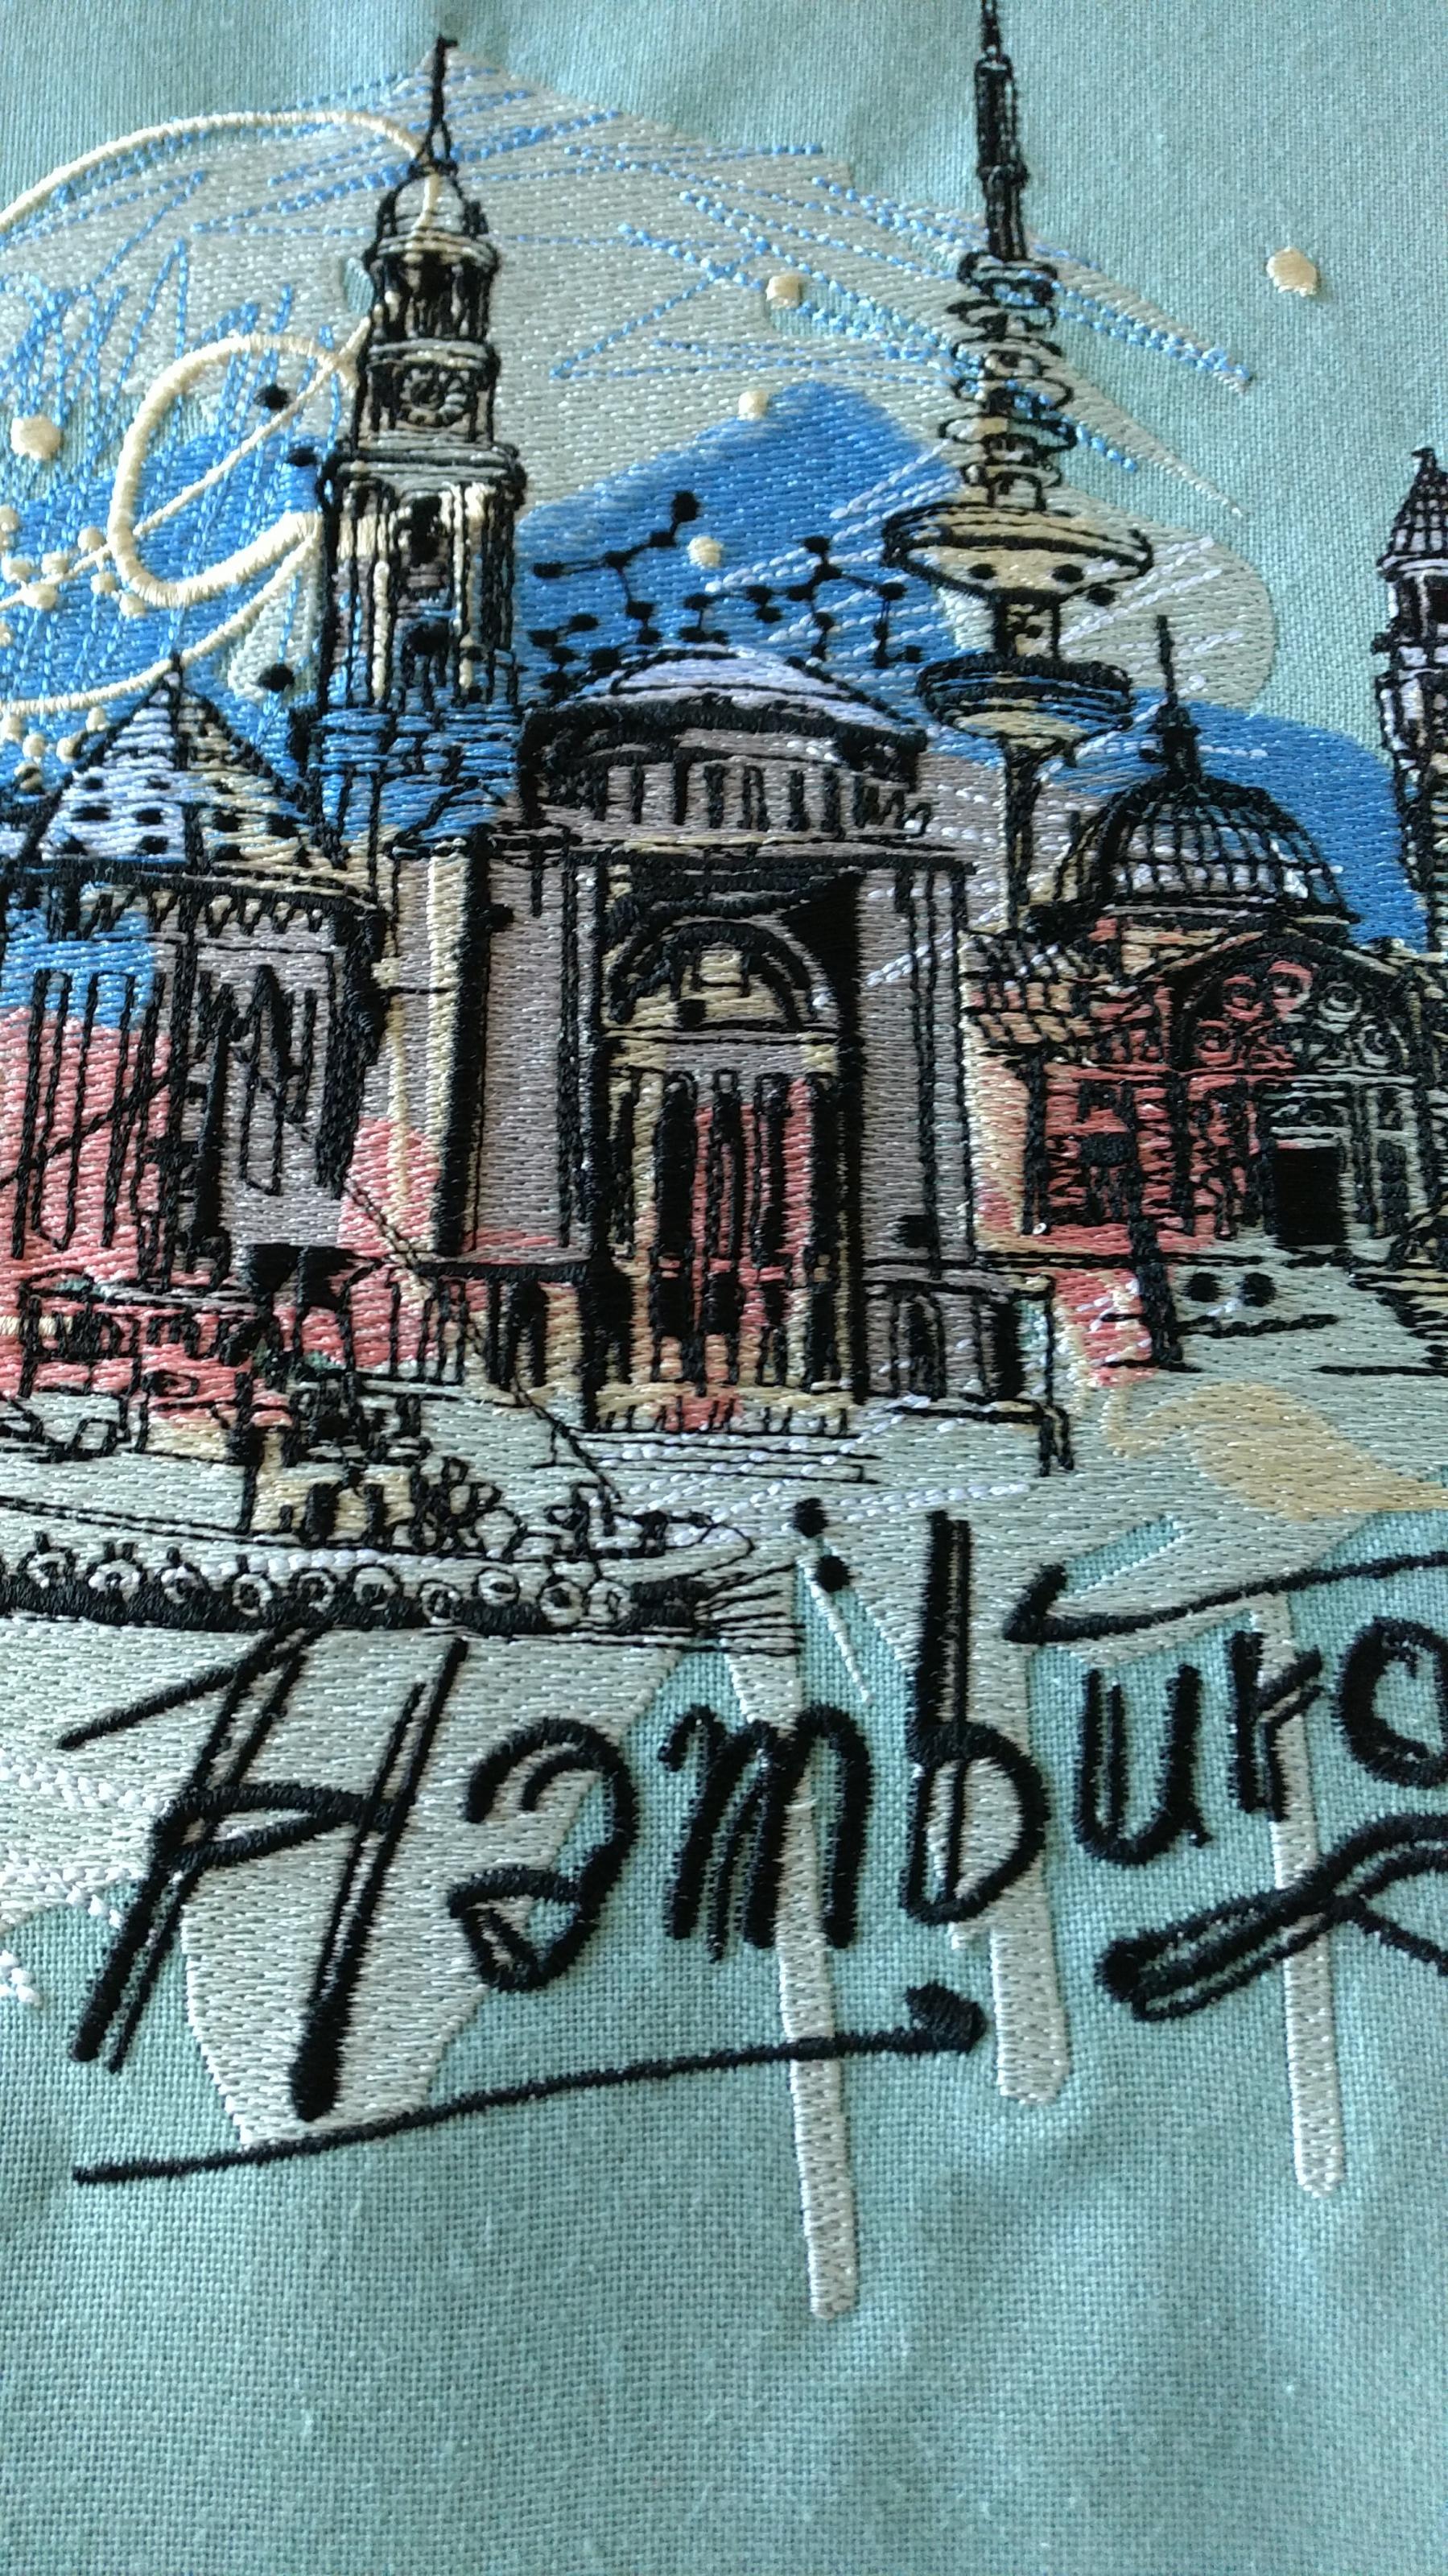 Hamburg sketch embroidery design on pillow